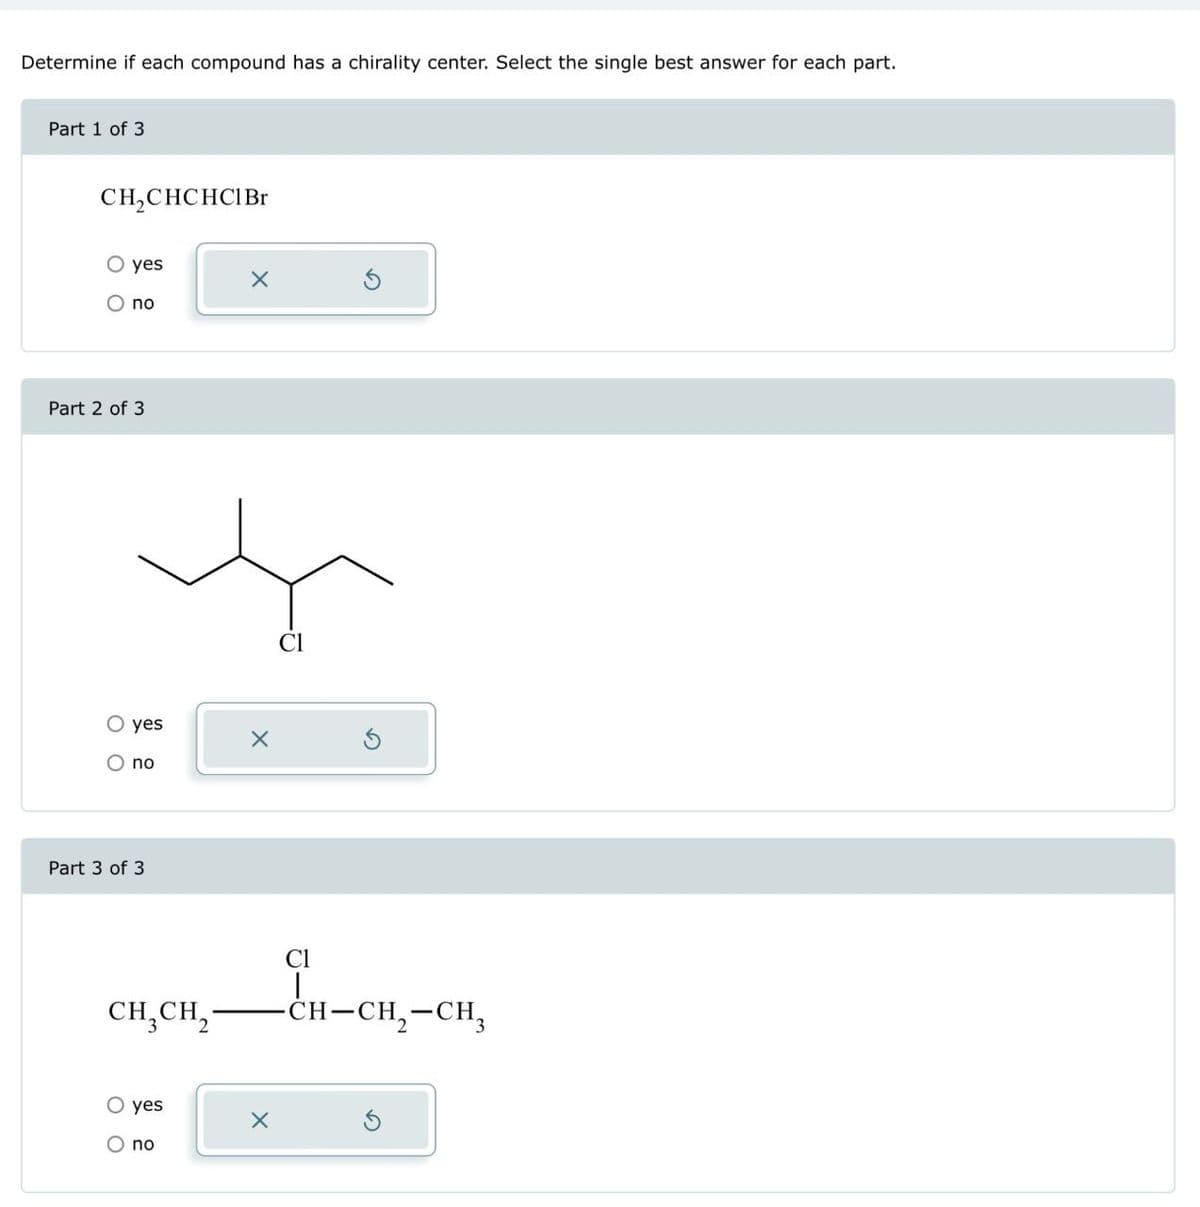 Determine if each compound has a chirality center. Select the single best answer for each part.
Part 1 of 3.
CH2CHCHCI Br
○ yes
no
Part 2 of 3
○ yes
O no
Part 3 of 3
Cl
CH3CH2
Cl
|
O yes
O no
-CH-CH2-CH3